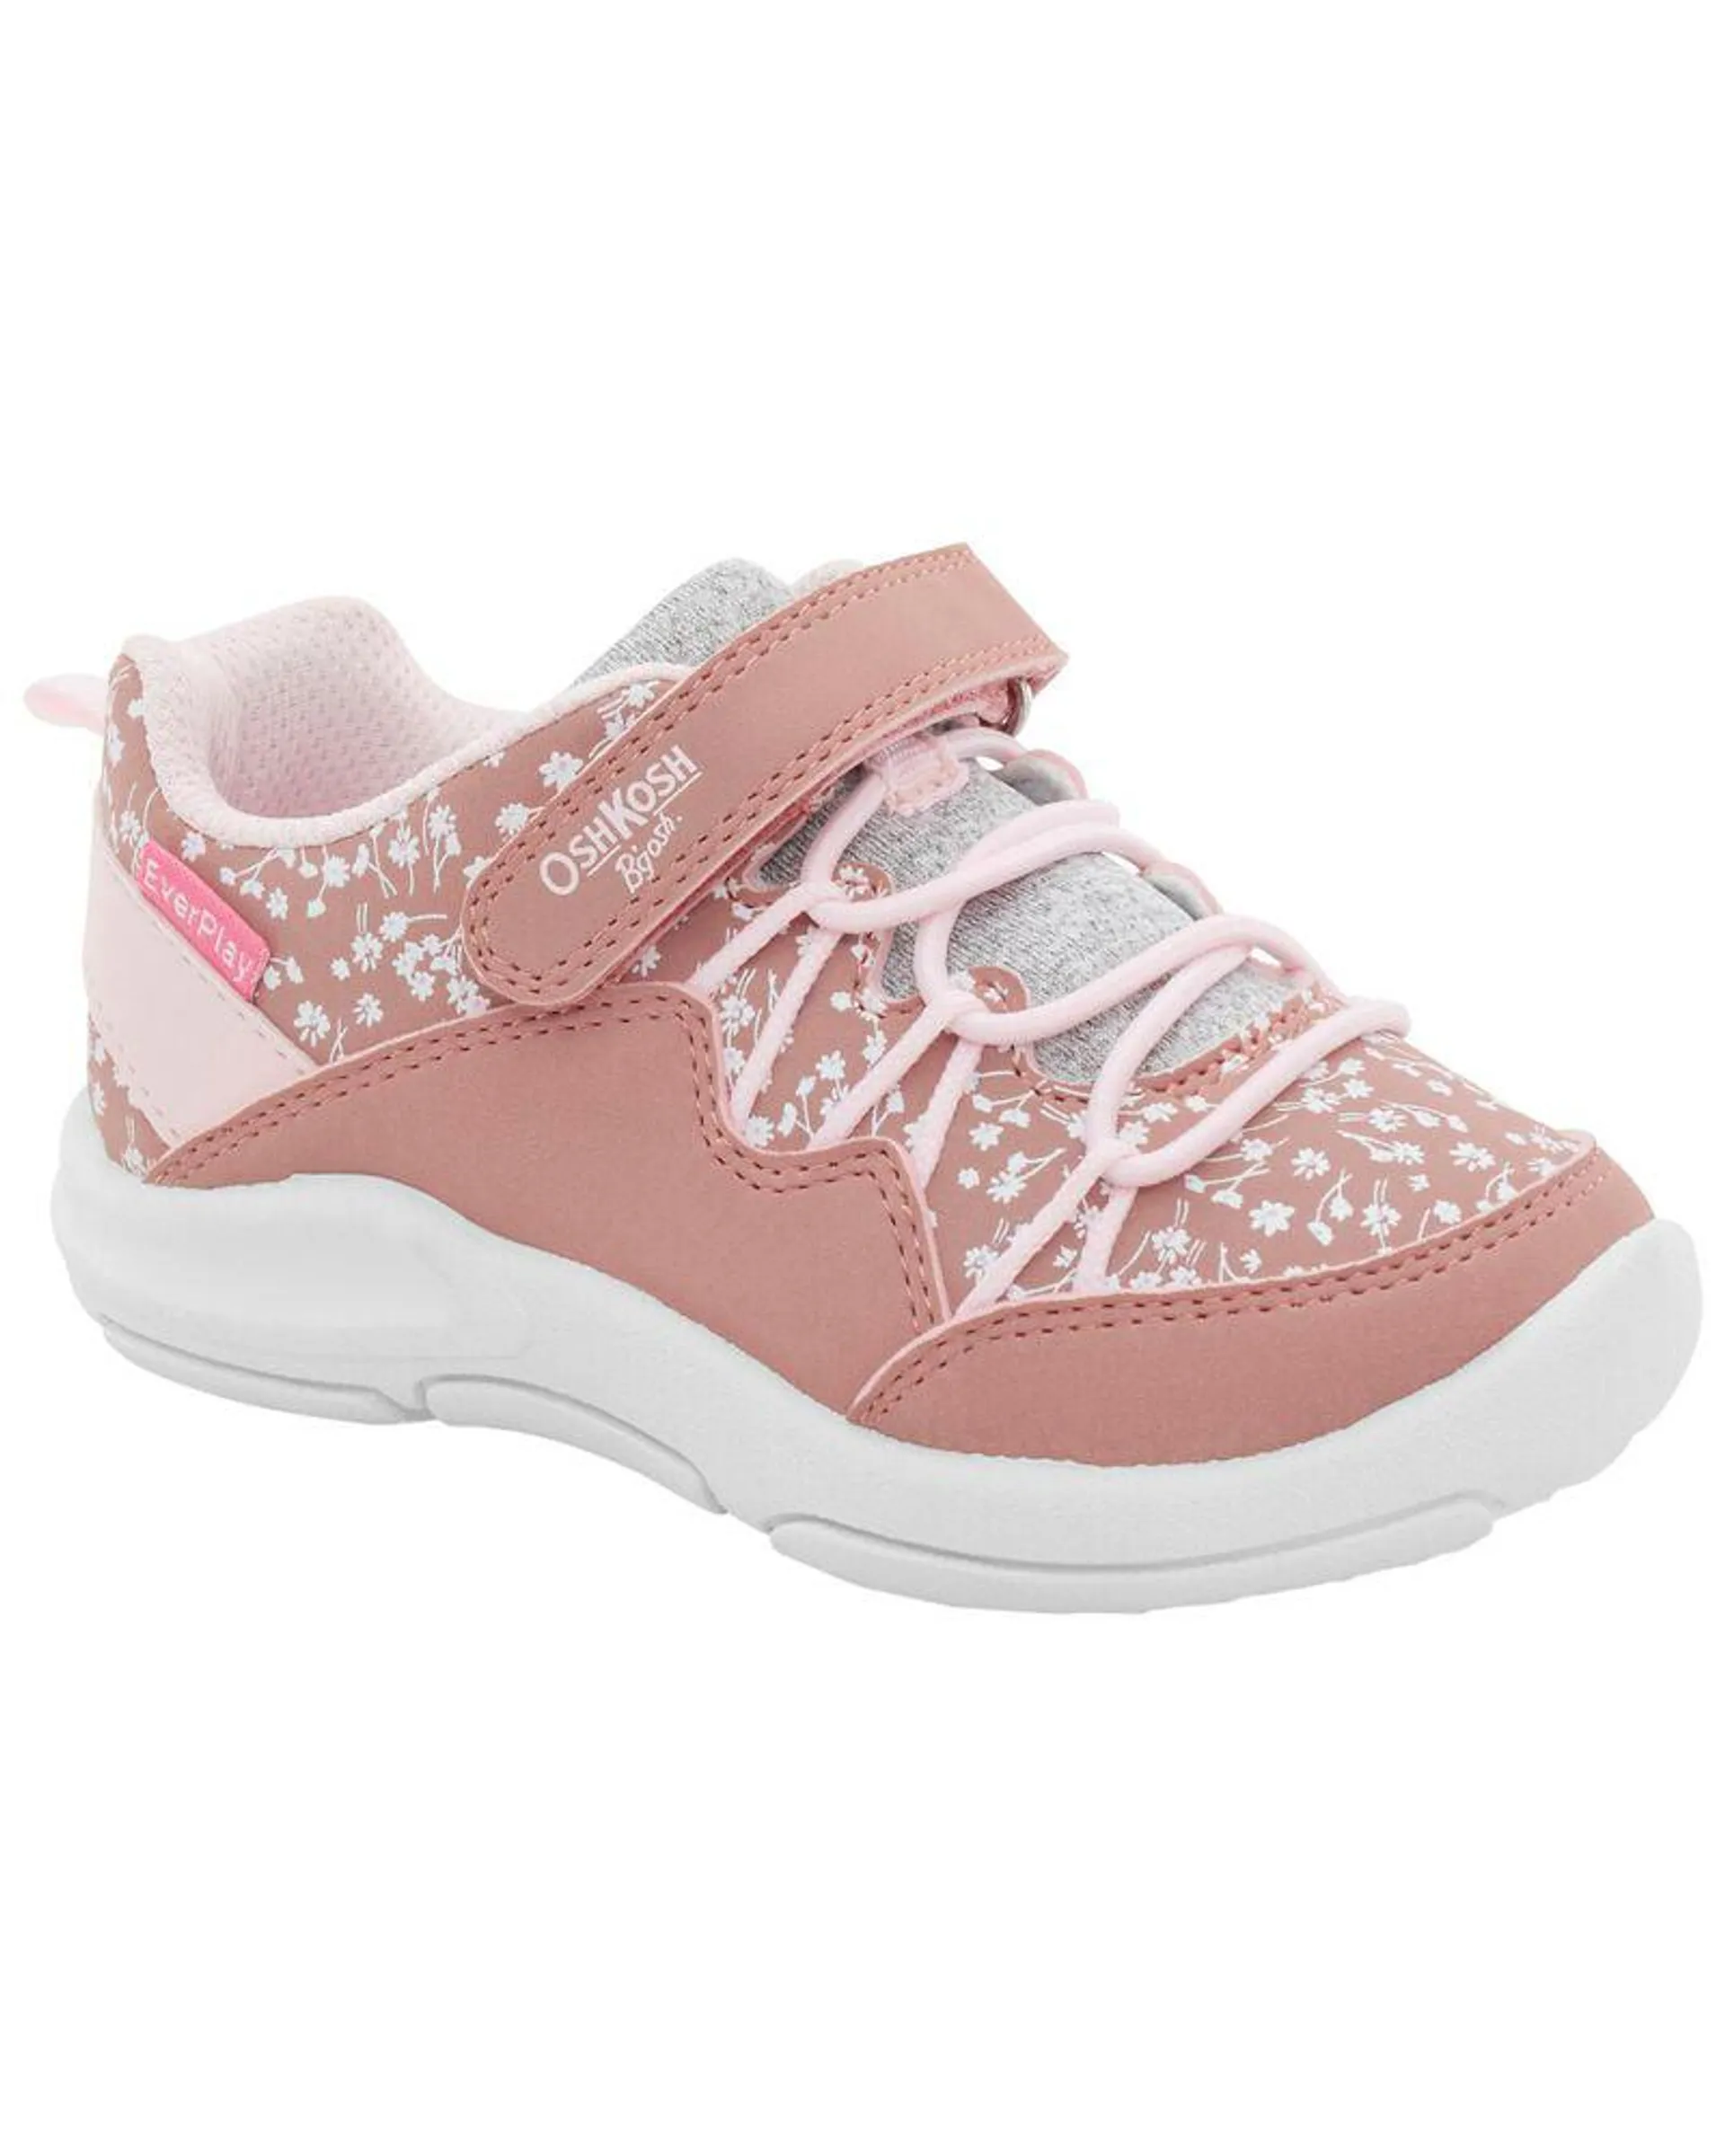 Toddler Floral EverPlay Sneakers